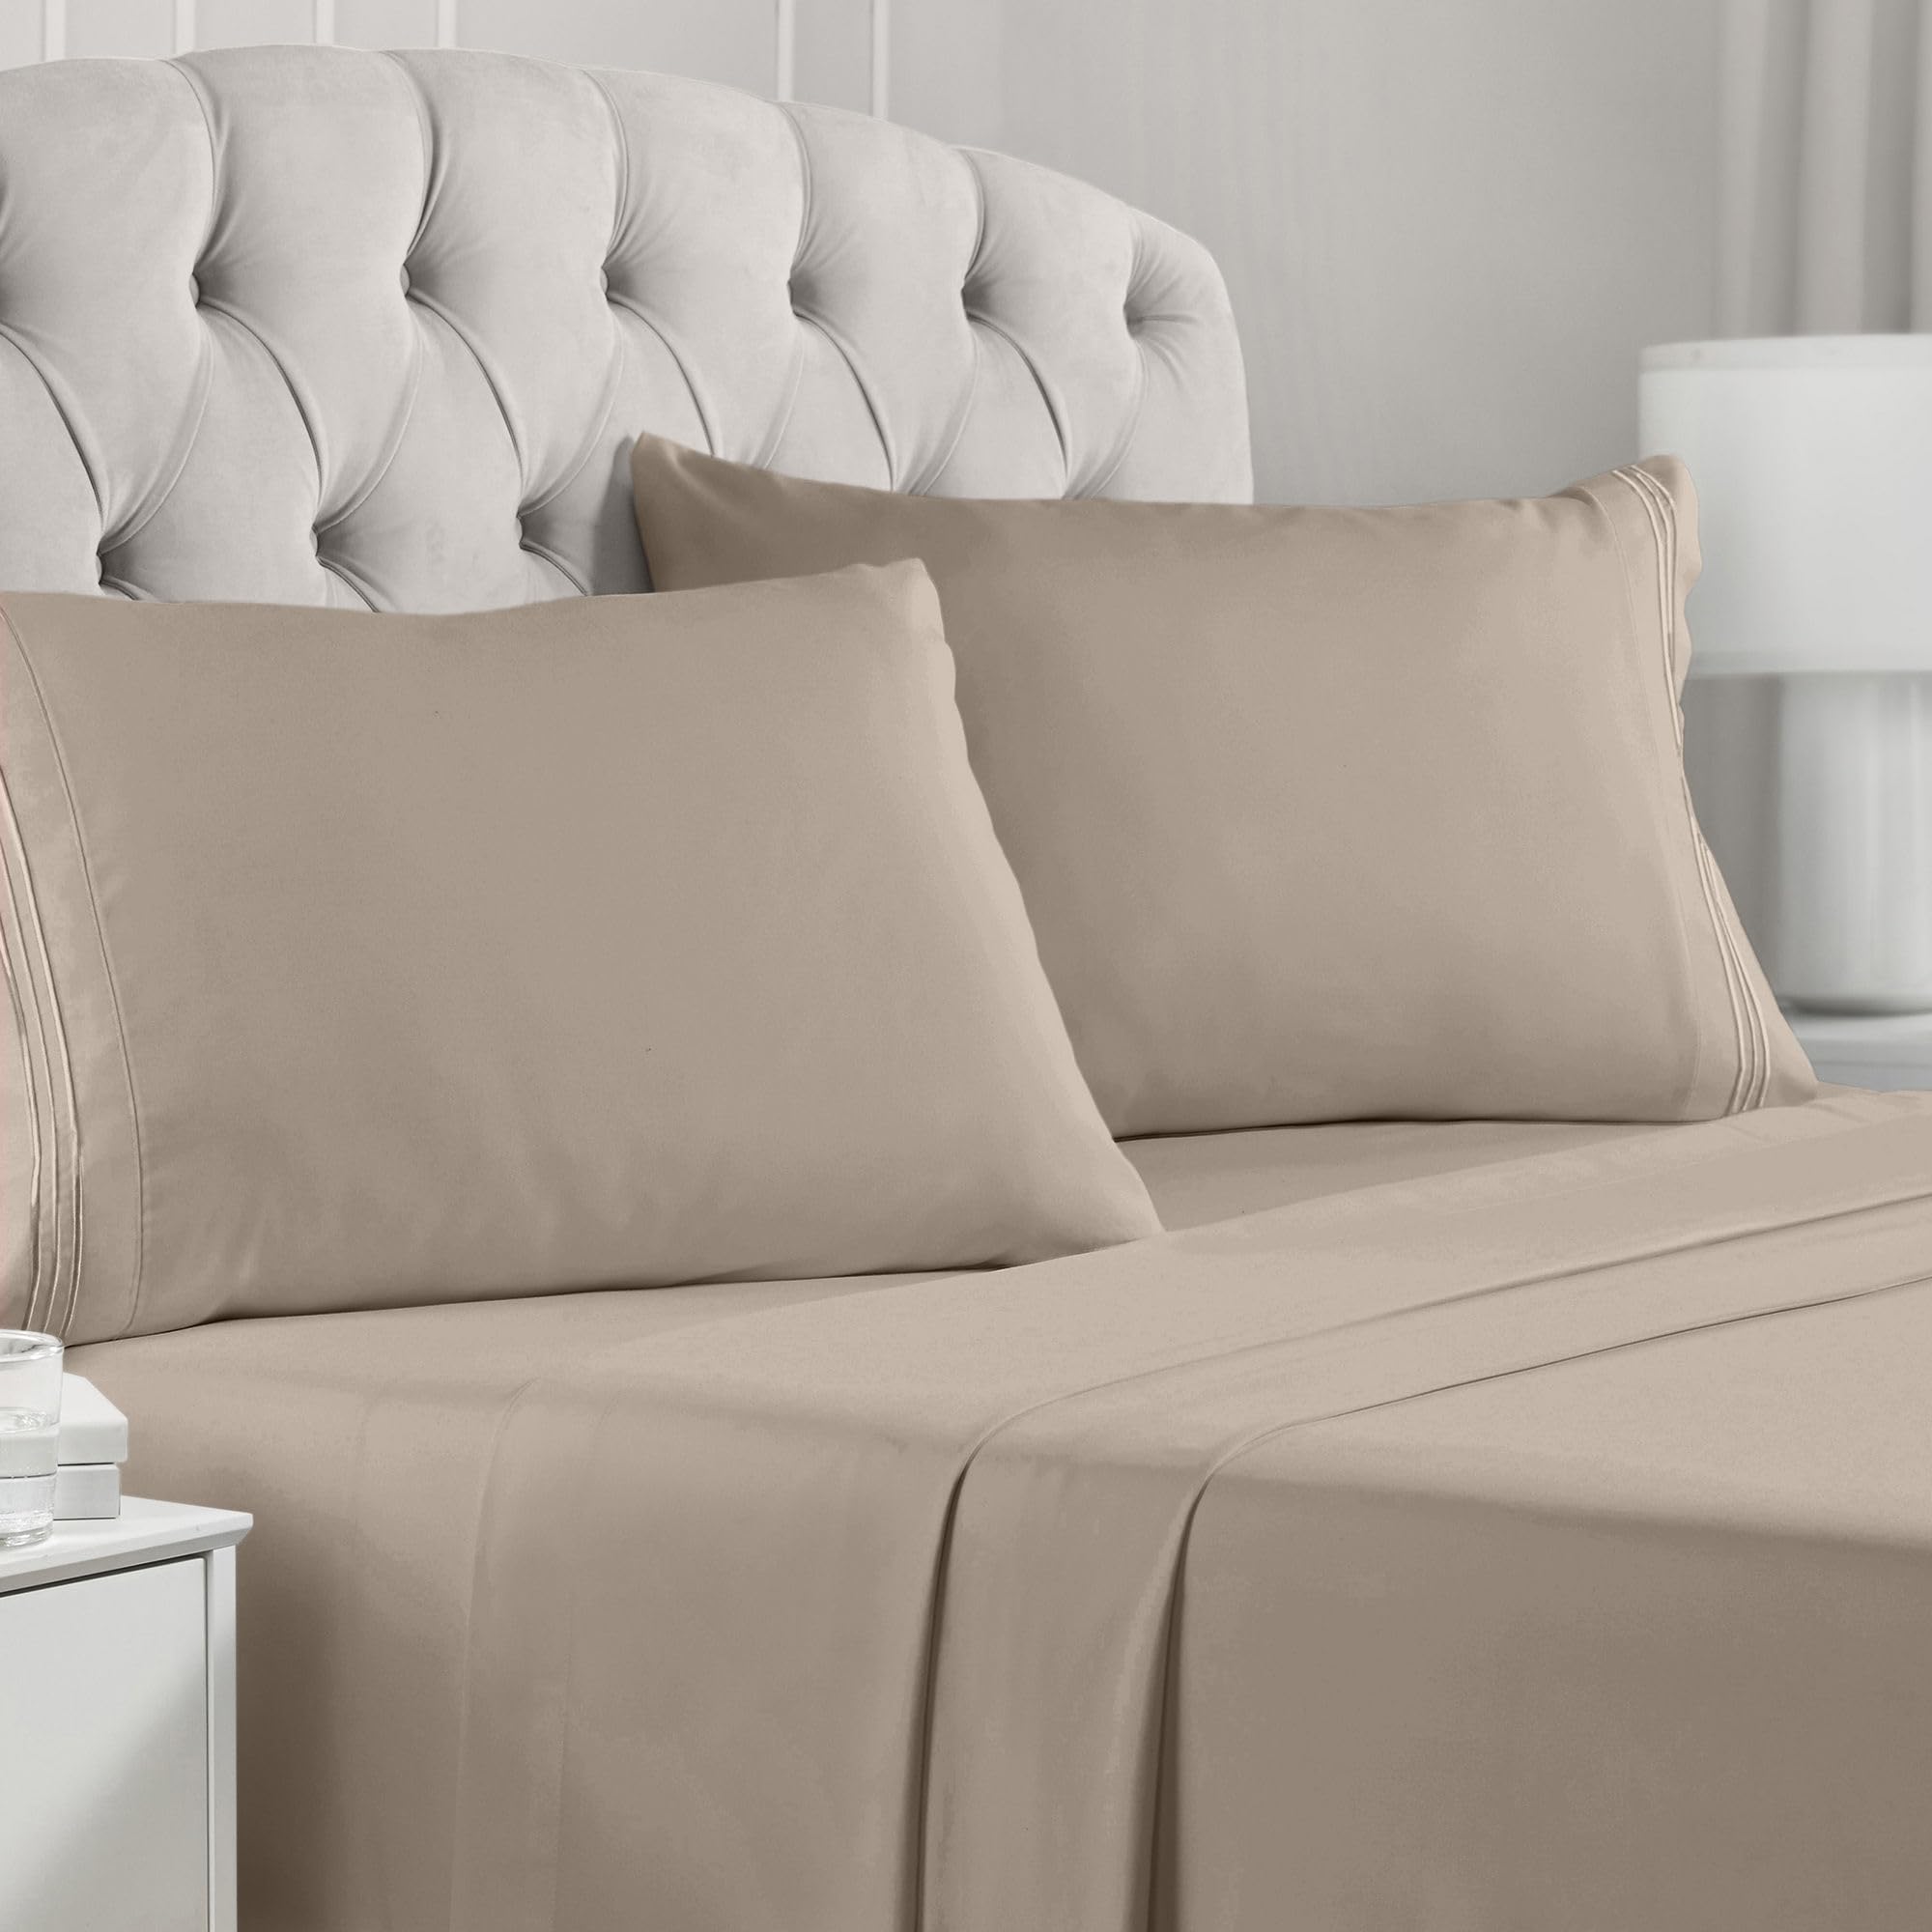 Book Cover Mellanni Queen Sheet Set - Hotel Luxury 1800 Bedding Sheets & Pillowcases - Extra Soft Cooling Bed Sheets - Deep Pocket up to 16 inch Mattress - Wrinkle, Fade, Stain Resistant - 4 Piece (Queen, Tan)